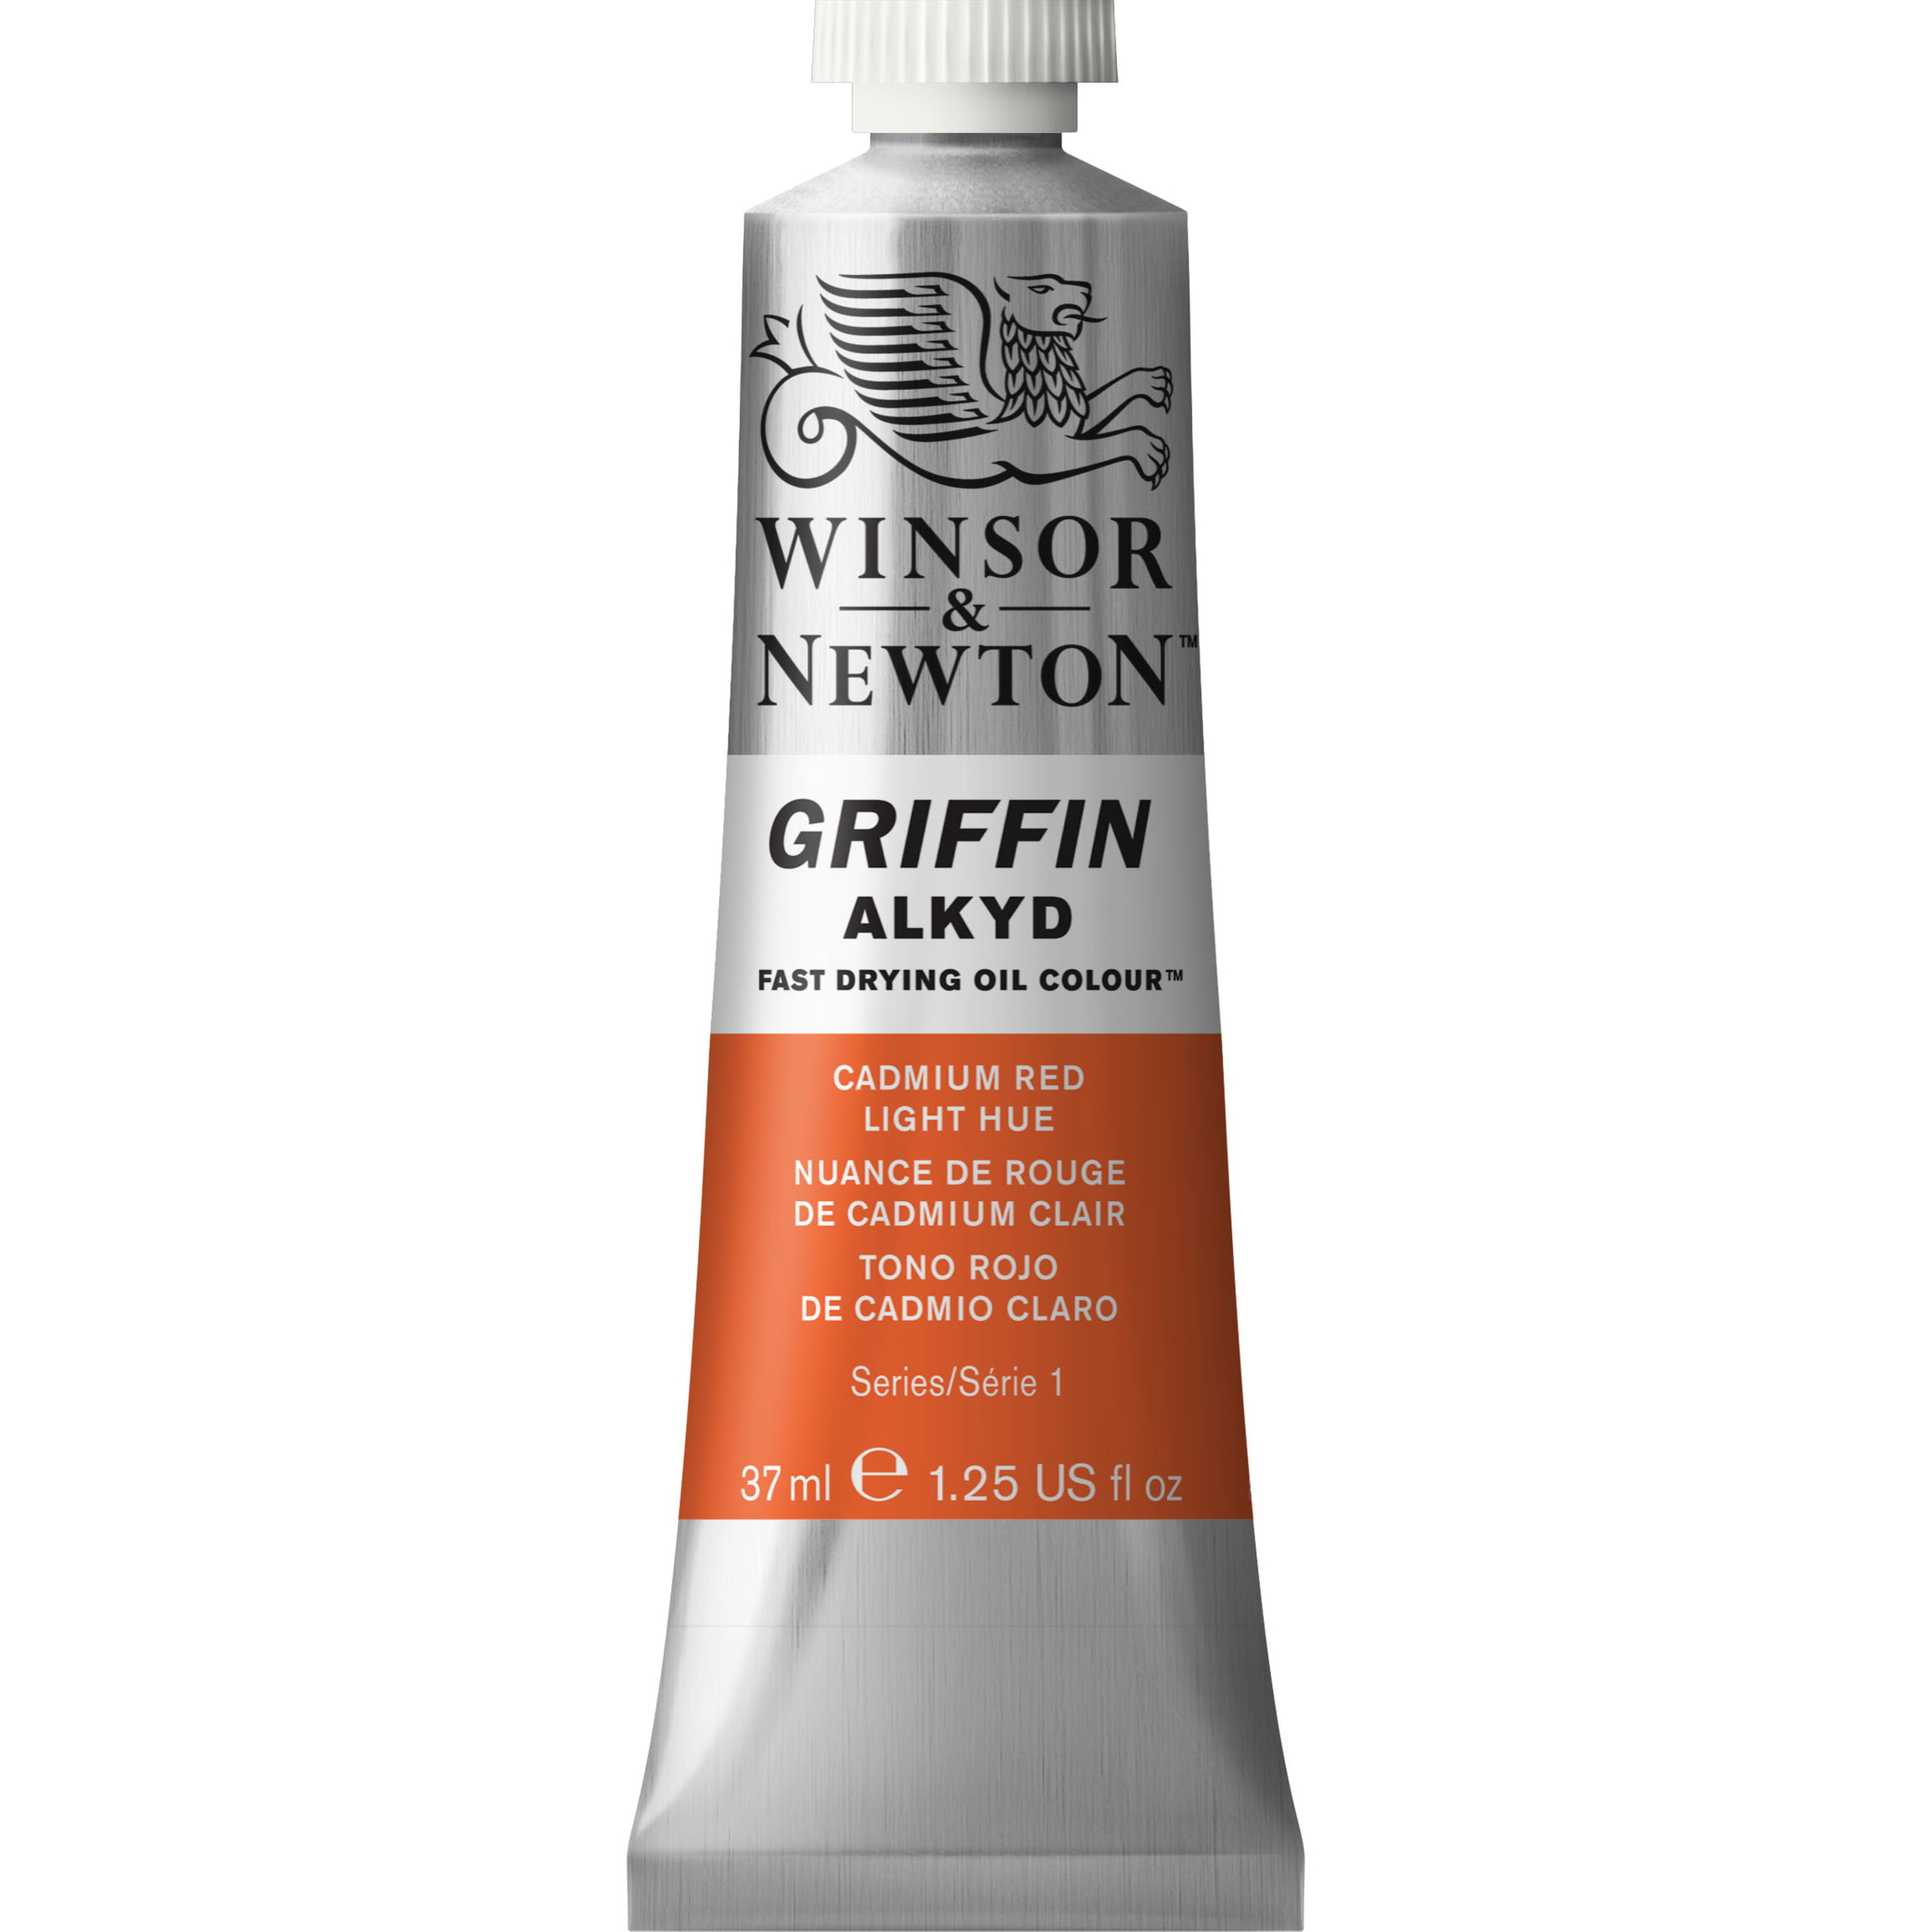 Winsor & Newton Griffin Alkyd FastDrying Oil Paint, 37ml, Cadmium Red Light Hue